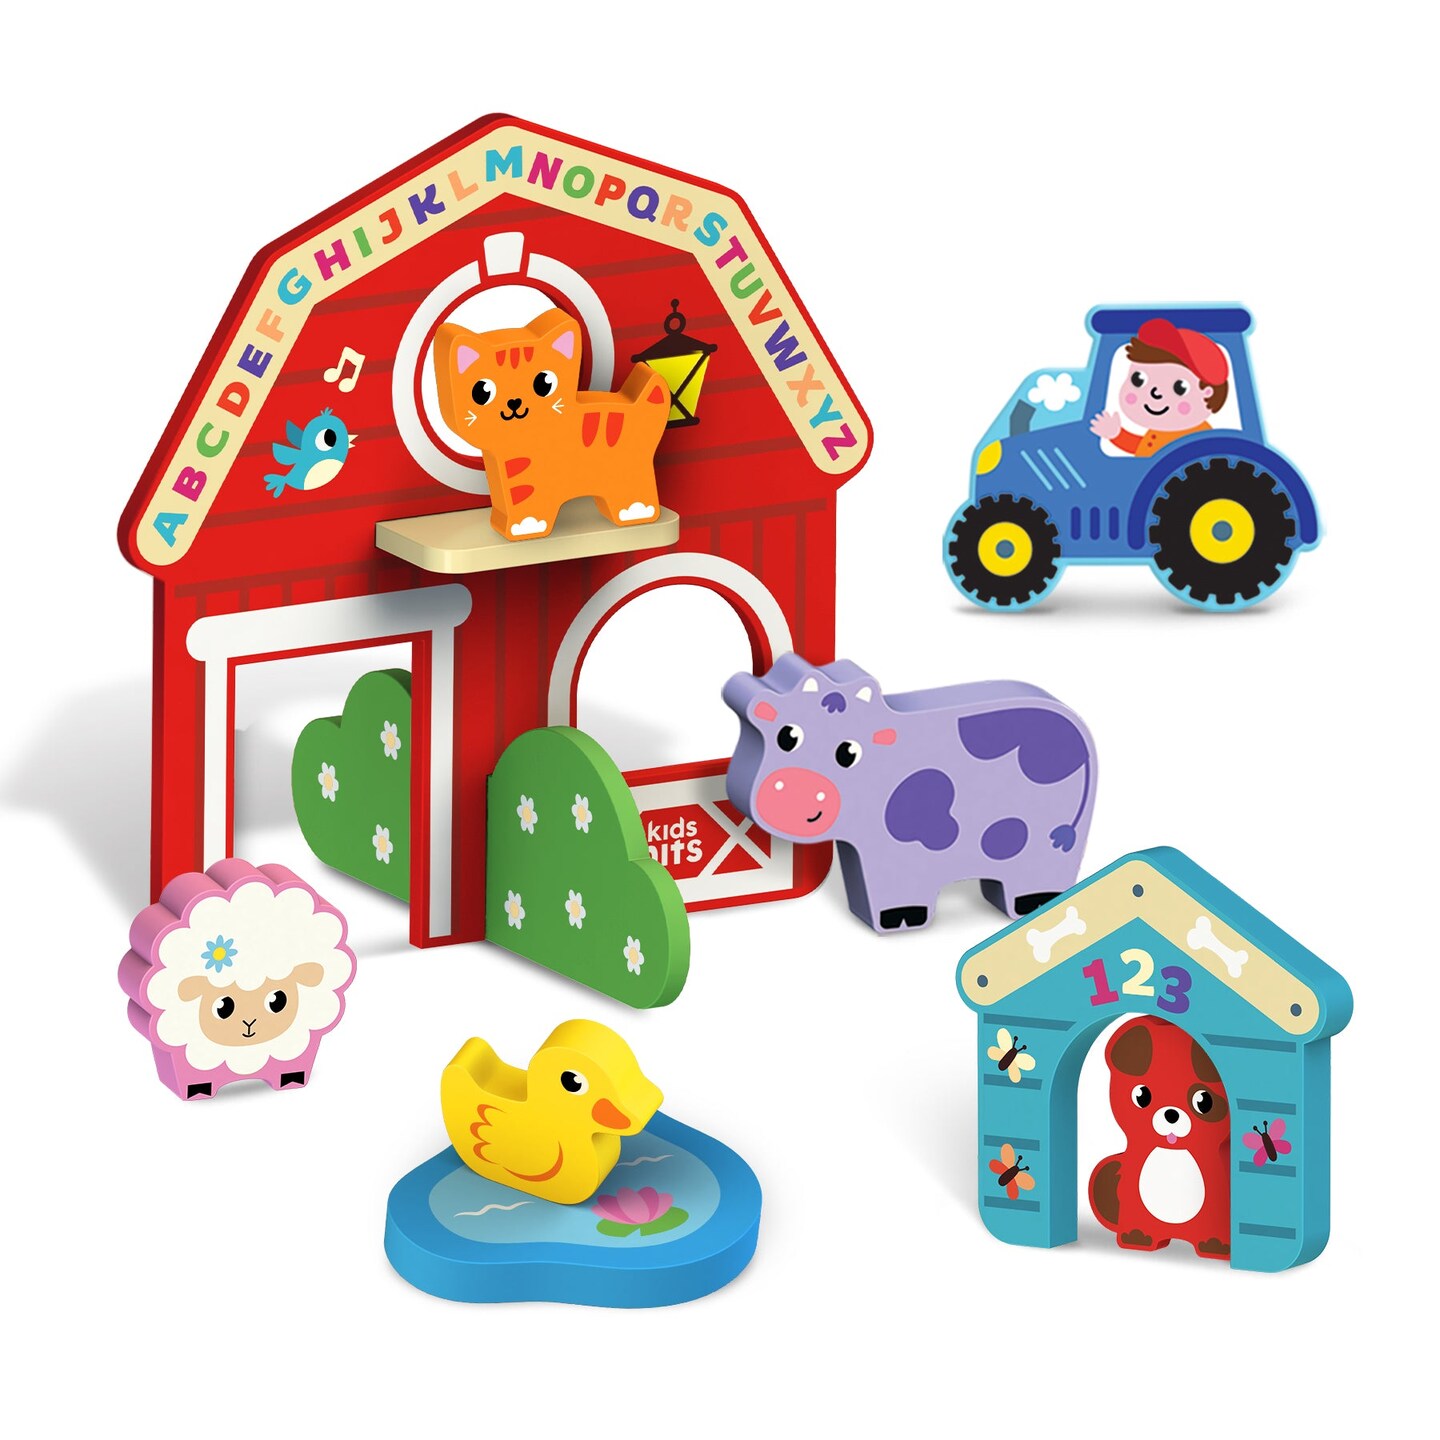 Kids Hits: Unleash Creativity with the Wooden Farm Set - Building, Matching, and Imaginative Play for Little Explorers!